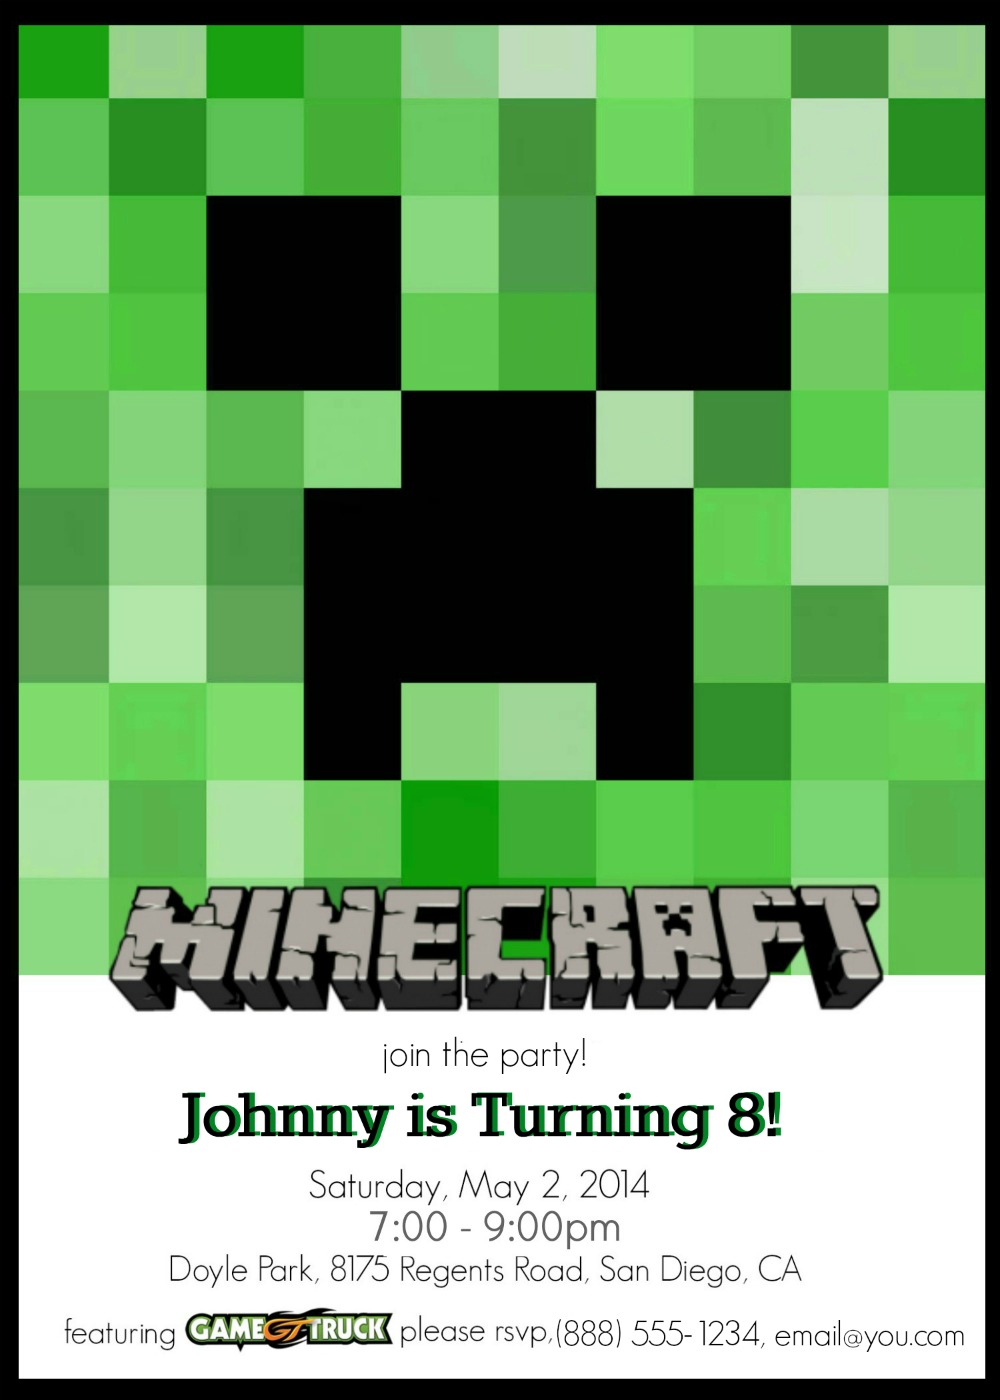 7-best-images-of-minecraft-diy-printable-invitation-minecraft-party